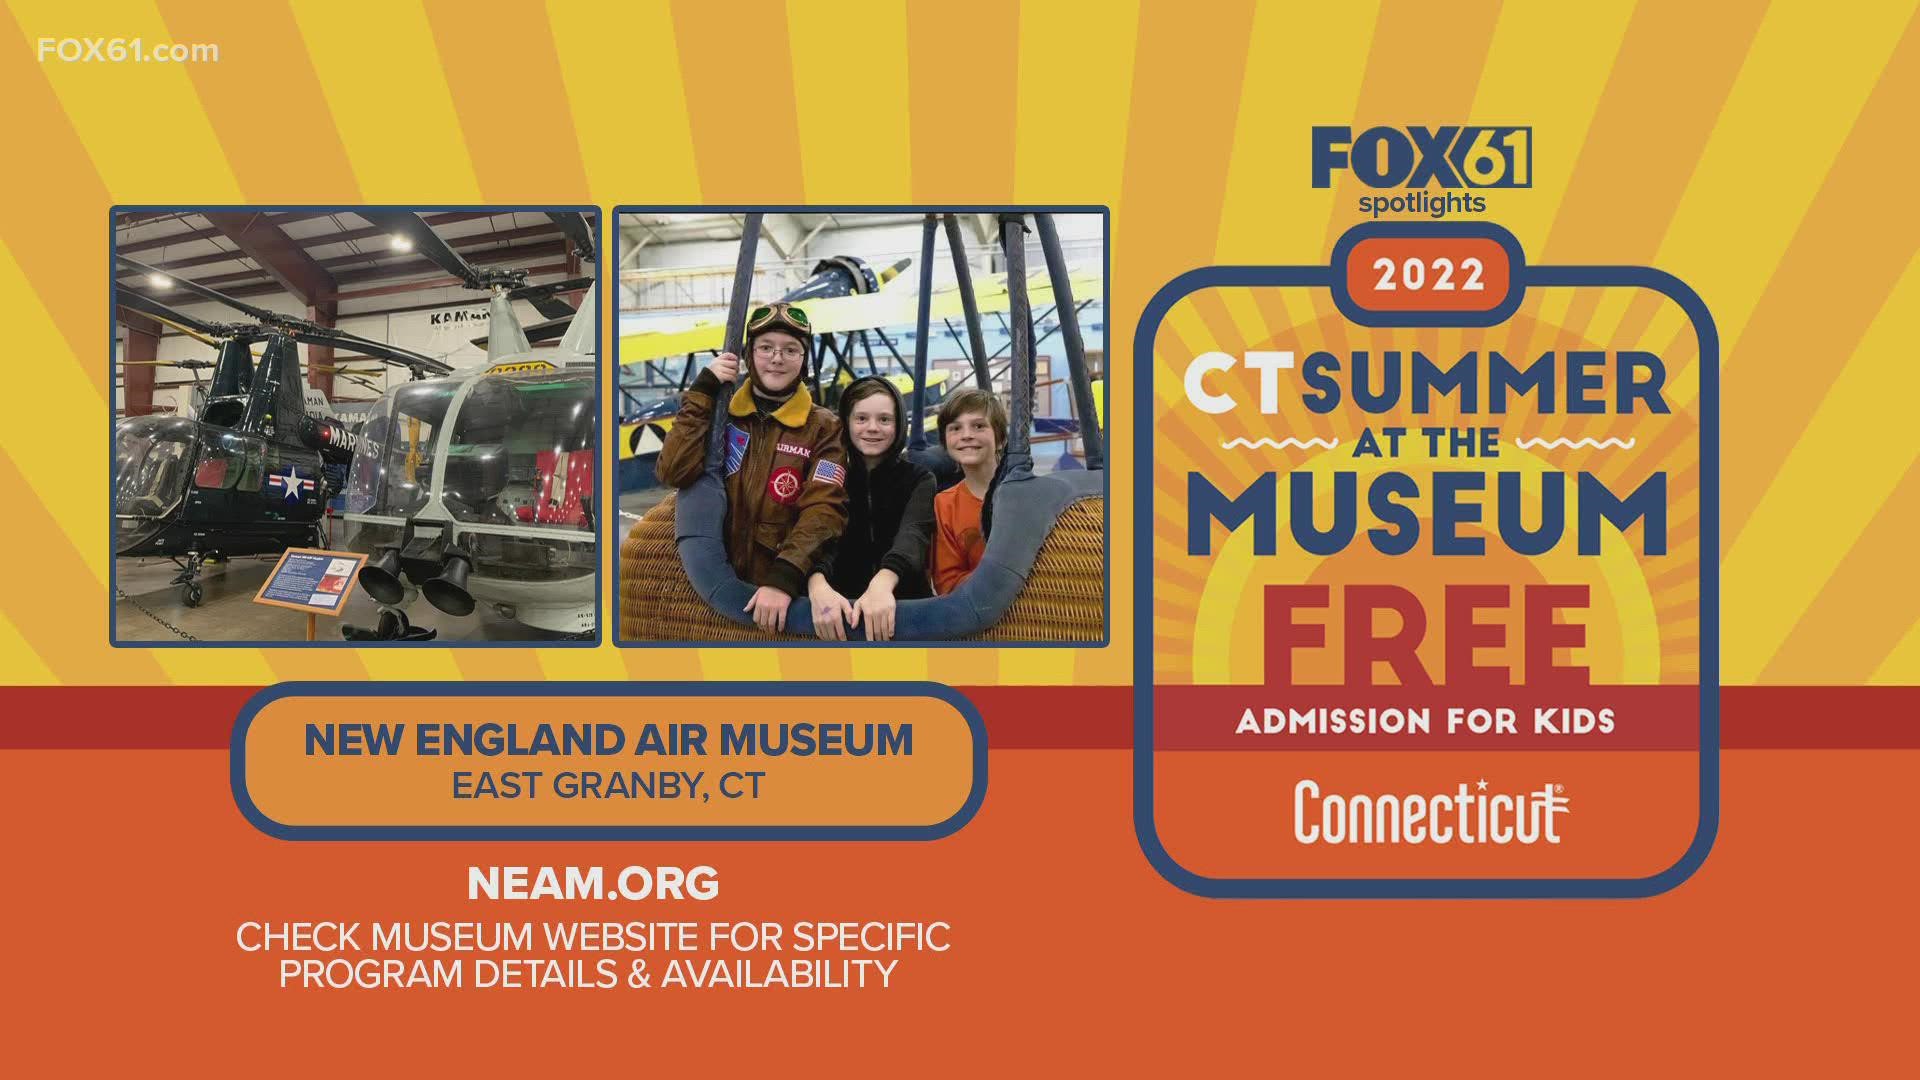 Kids 18 and under can visit the New England Air Museum in East Granby for free with an adult who is a resident of Connecticut. It runs through Sept. 5.